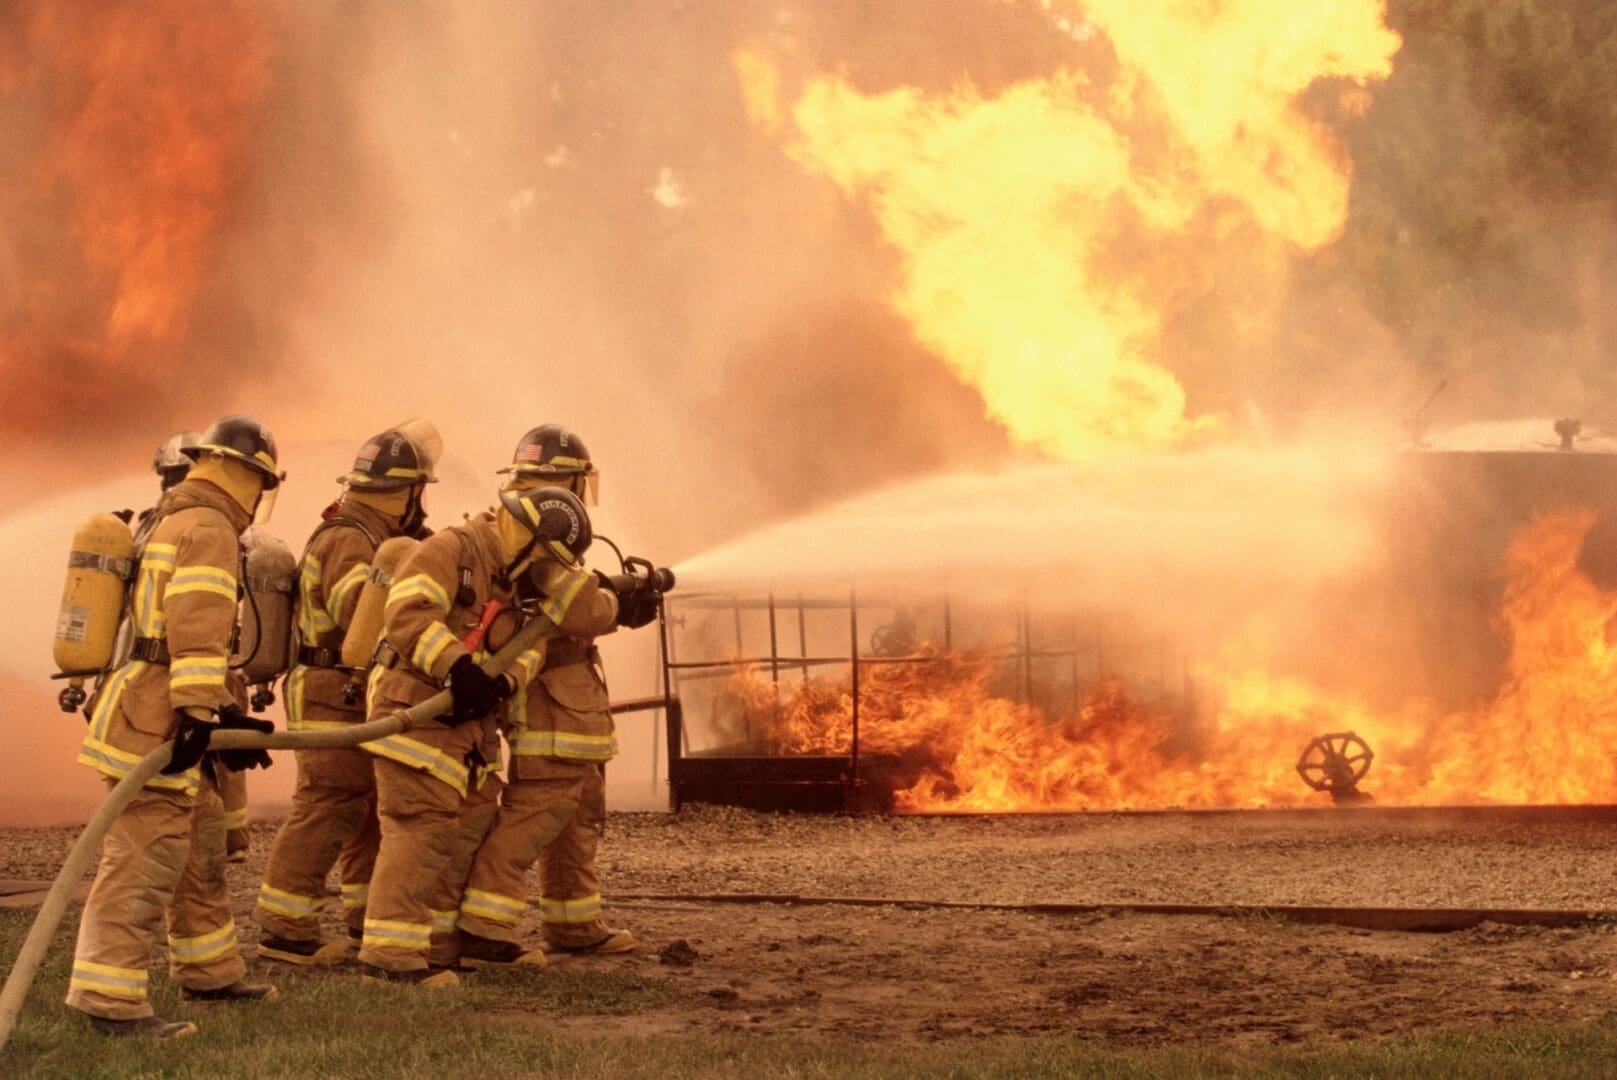 A group of firefighters standing next to a fire.